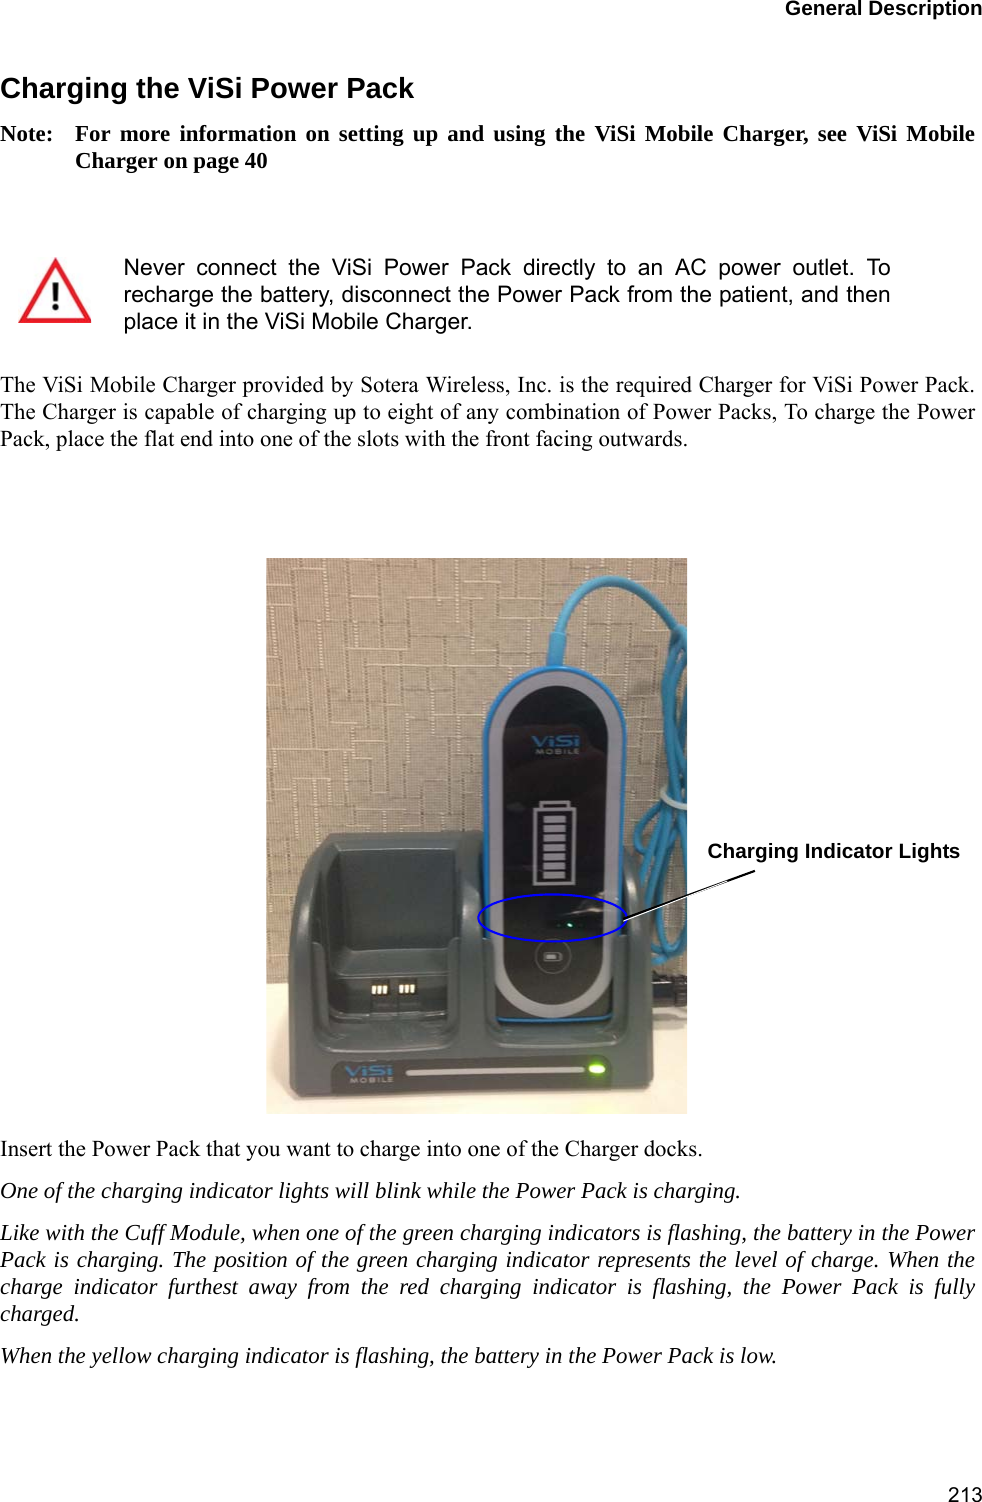 General Description213Charging the ViSi Power PackNote: For more information on setting up and using the ViSi Mobile Charger, see ViSi MobileCharger on page 40The ViSi Mobile Charger provided by Sotera Wireless, Inc. is the required Charger for ViSi Power Pack.The Charger is capable of charging up to eight of any combination of Power Packs, To charge the PowerPack, place the flat end into one of the slots with the front facing outwards. Insert the Power Pack that you want to charge into one of the Charger docks.One of the charging indicator lights will blink while the Power Pack is charging.Like with the Cuff Module, when one of the green charging indicators is flashing, the battery in the PowerPack is charging. The position of the green charging indicator represents the level of charge. When thecharge indicator furthest away from the red charging indicator is flashing, the Power Pack is fullycharged.When the yellow charging indicator is flashing, the battery in the Power Pack is low. Never connect the ViSi Power Pack directly to an AC power outlet. Torecharge the battery, disconnect the Power Pack from the patient, and thenplace it in the ViSi Mobile Charger.       Charging Indicator Lights